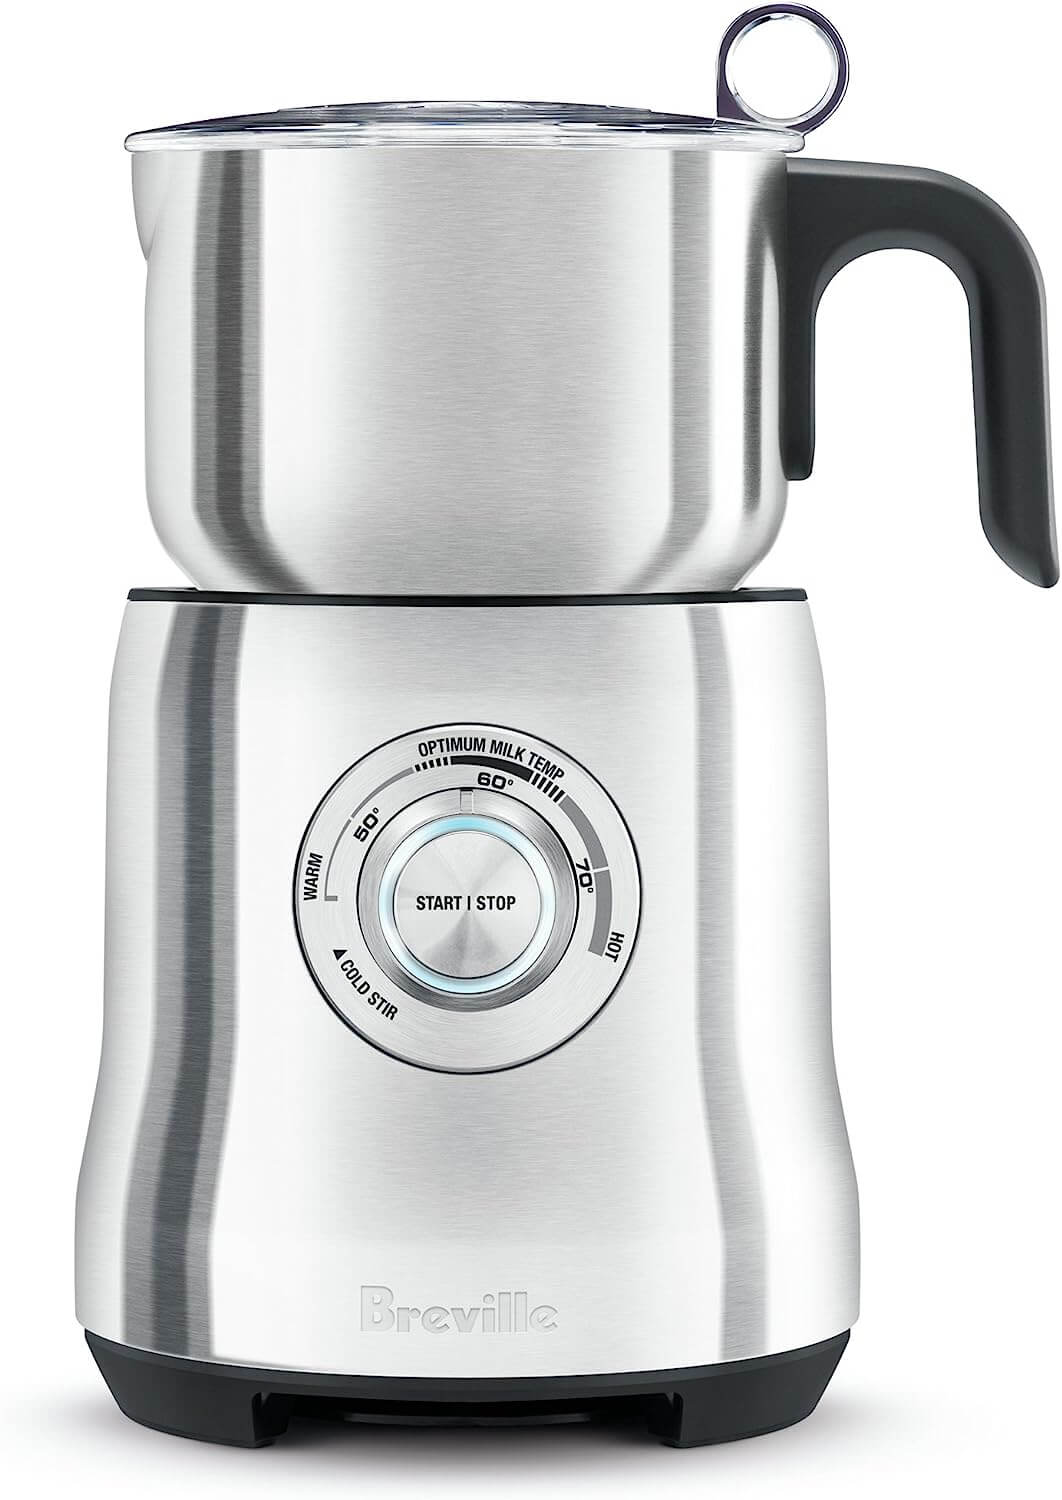 Breville Milk Cafe Electric Frother